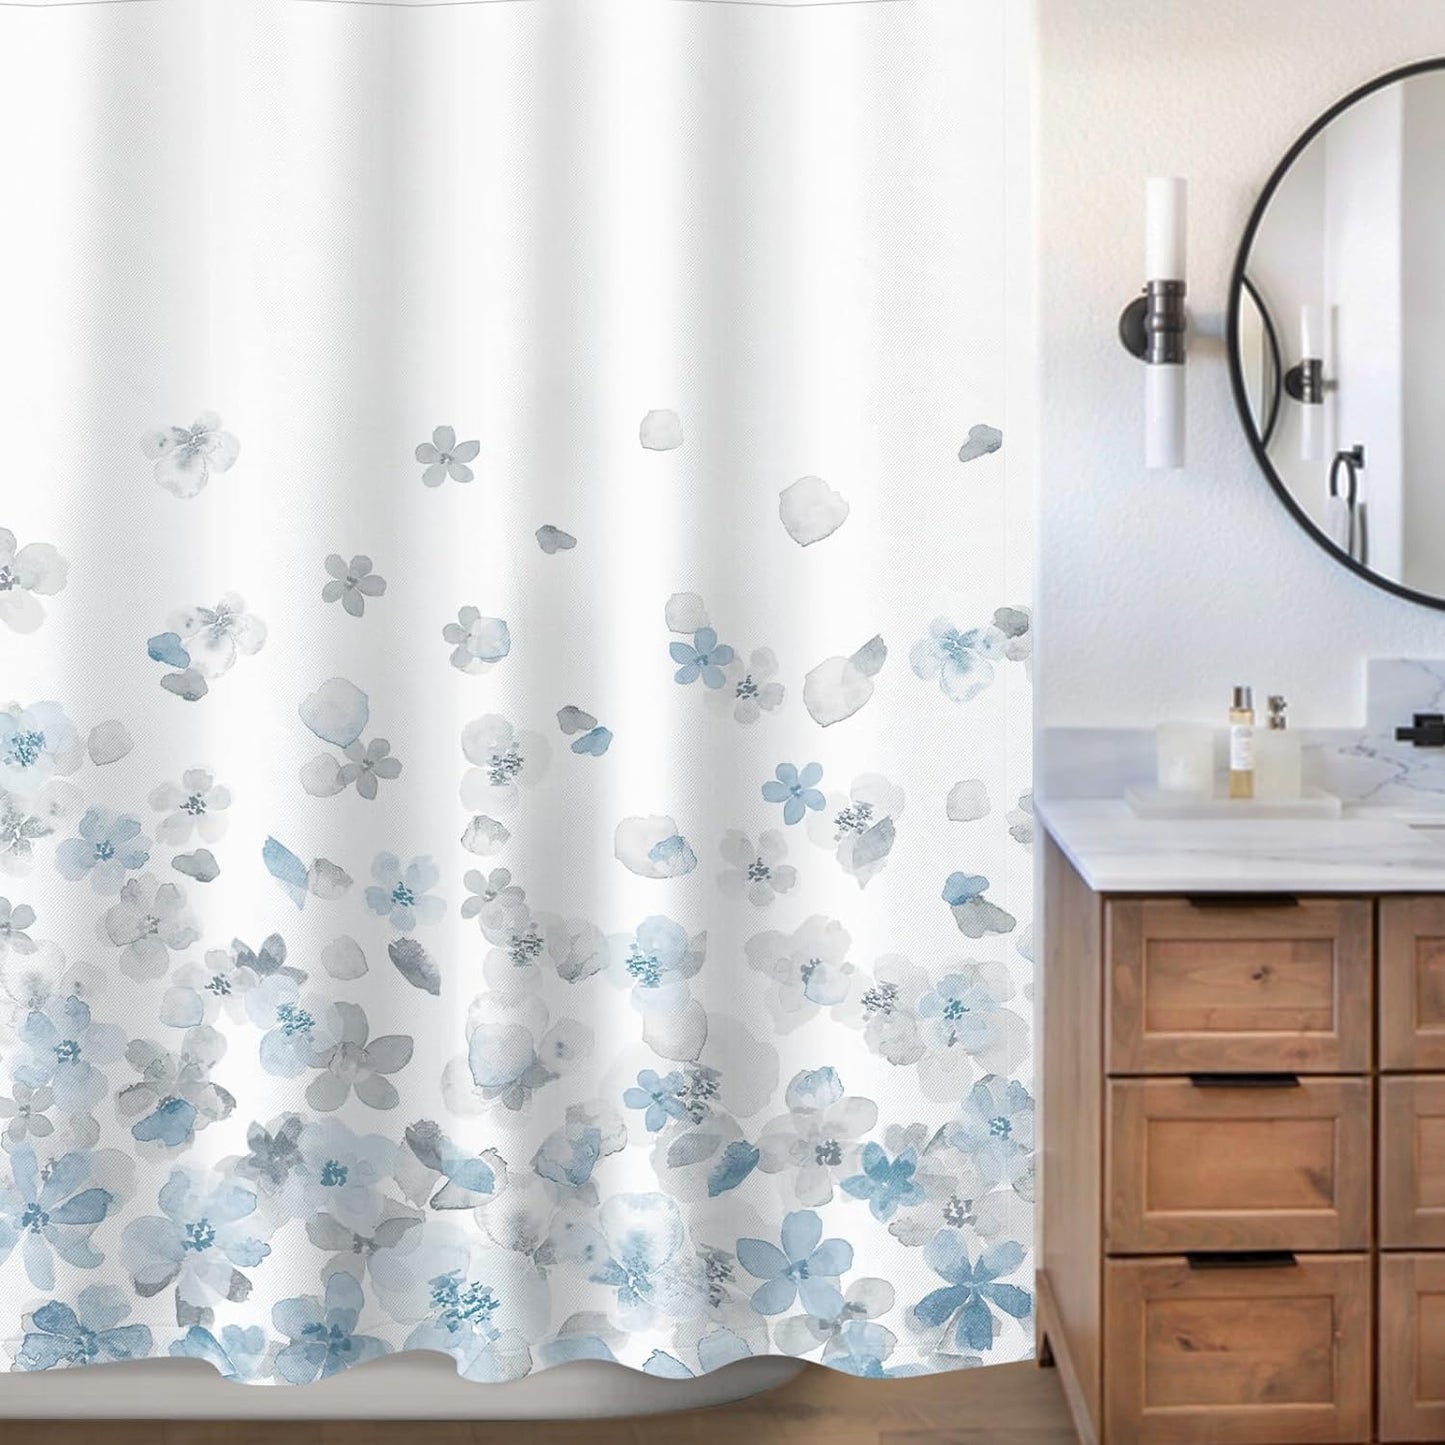 Sunlit Design Simple Style Blue and Gray Flower Blossoms Fabric Shower Curtains for Bathroom Decor with White Background, Machine Washable